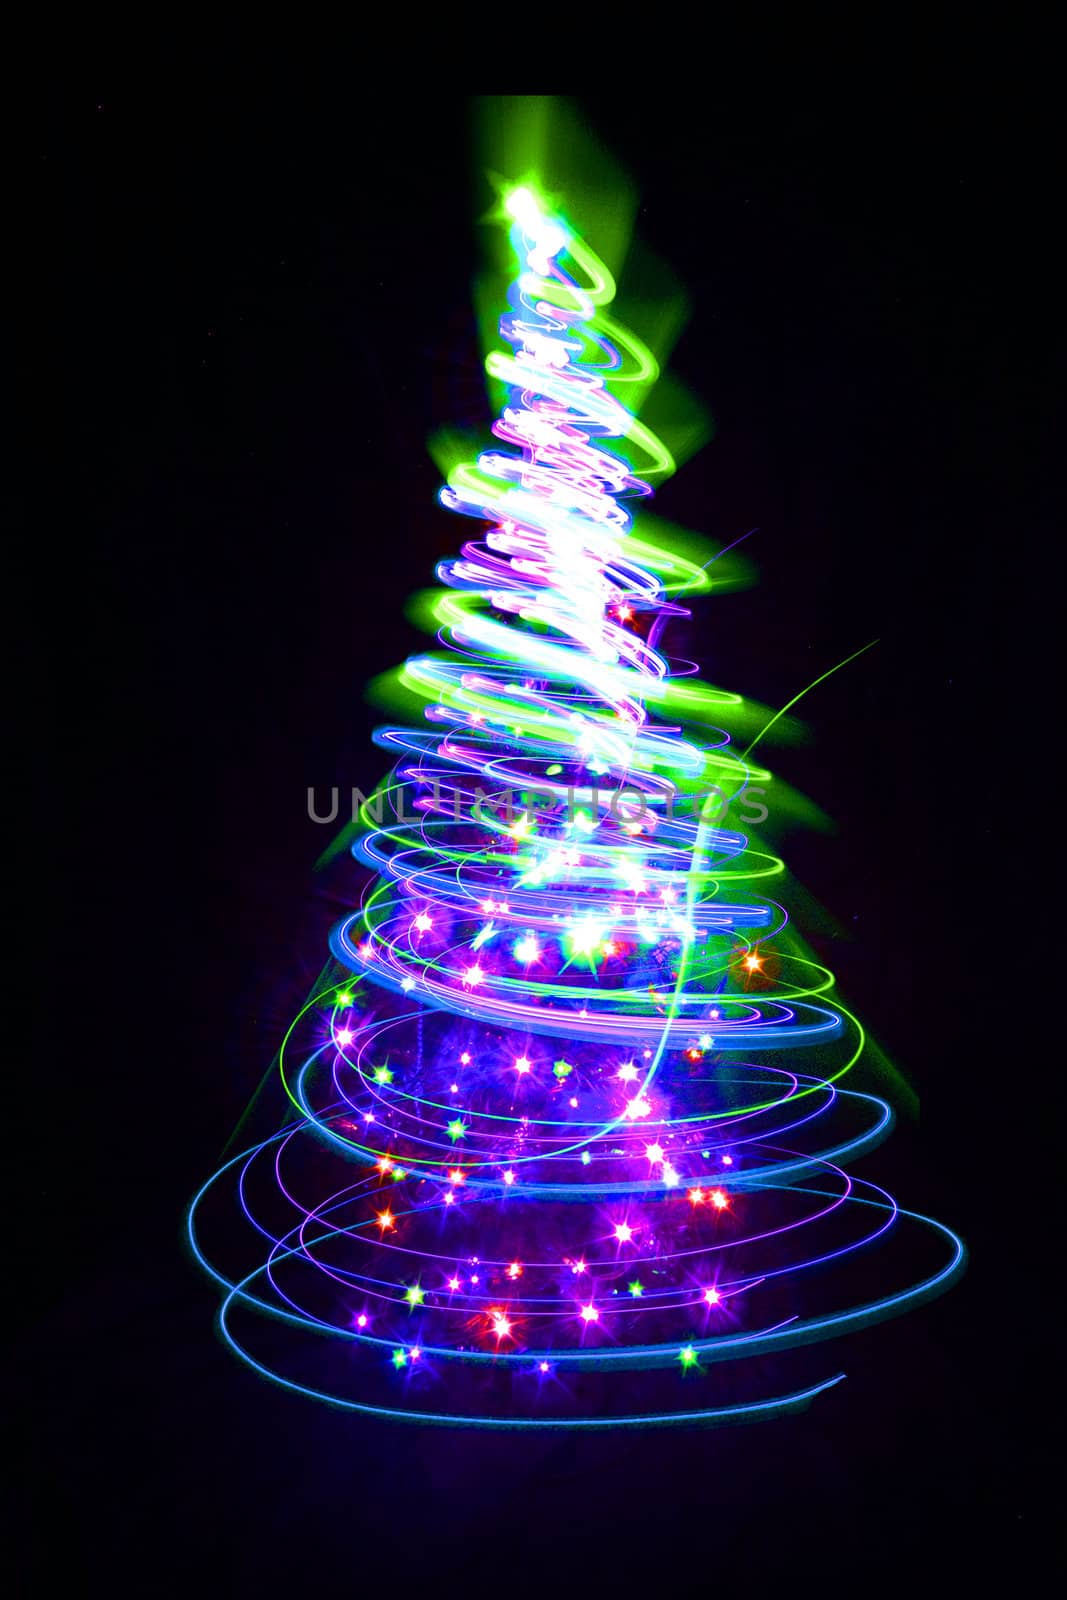 nice christmas tree from the colors lights 